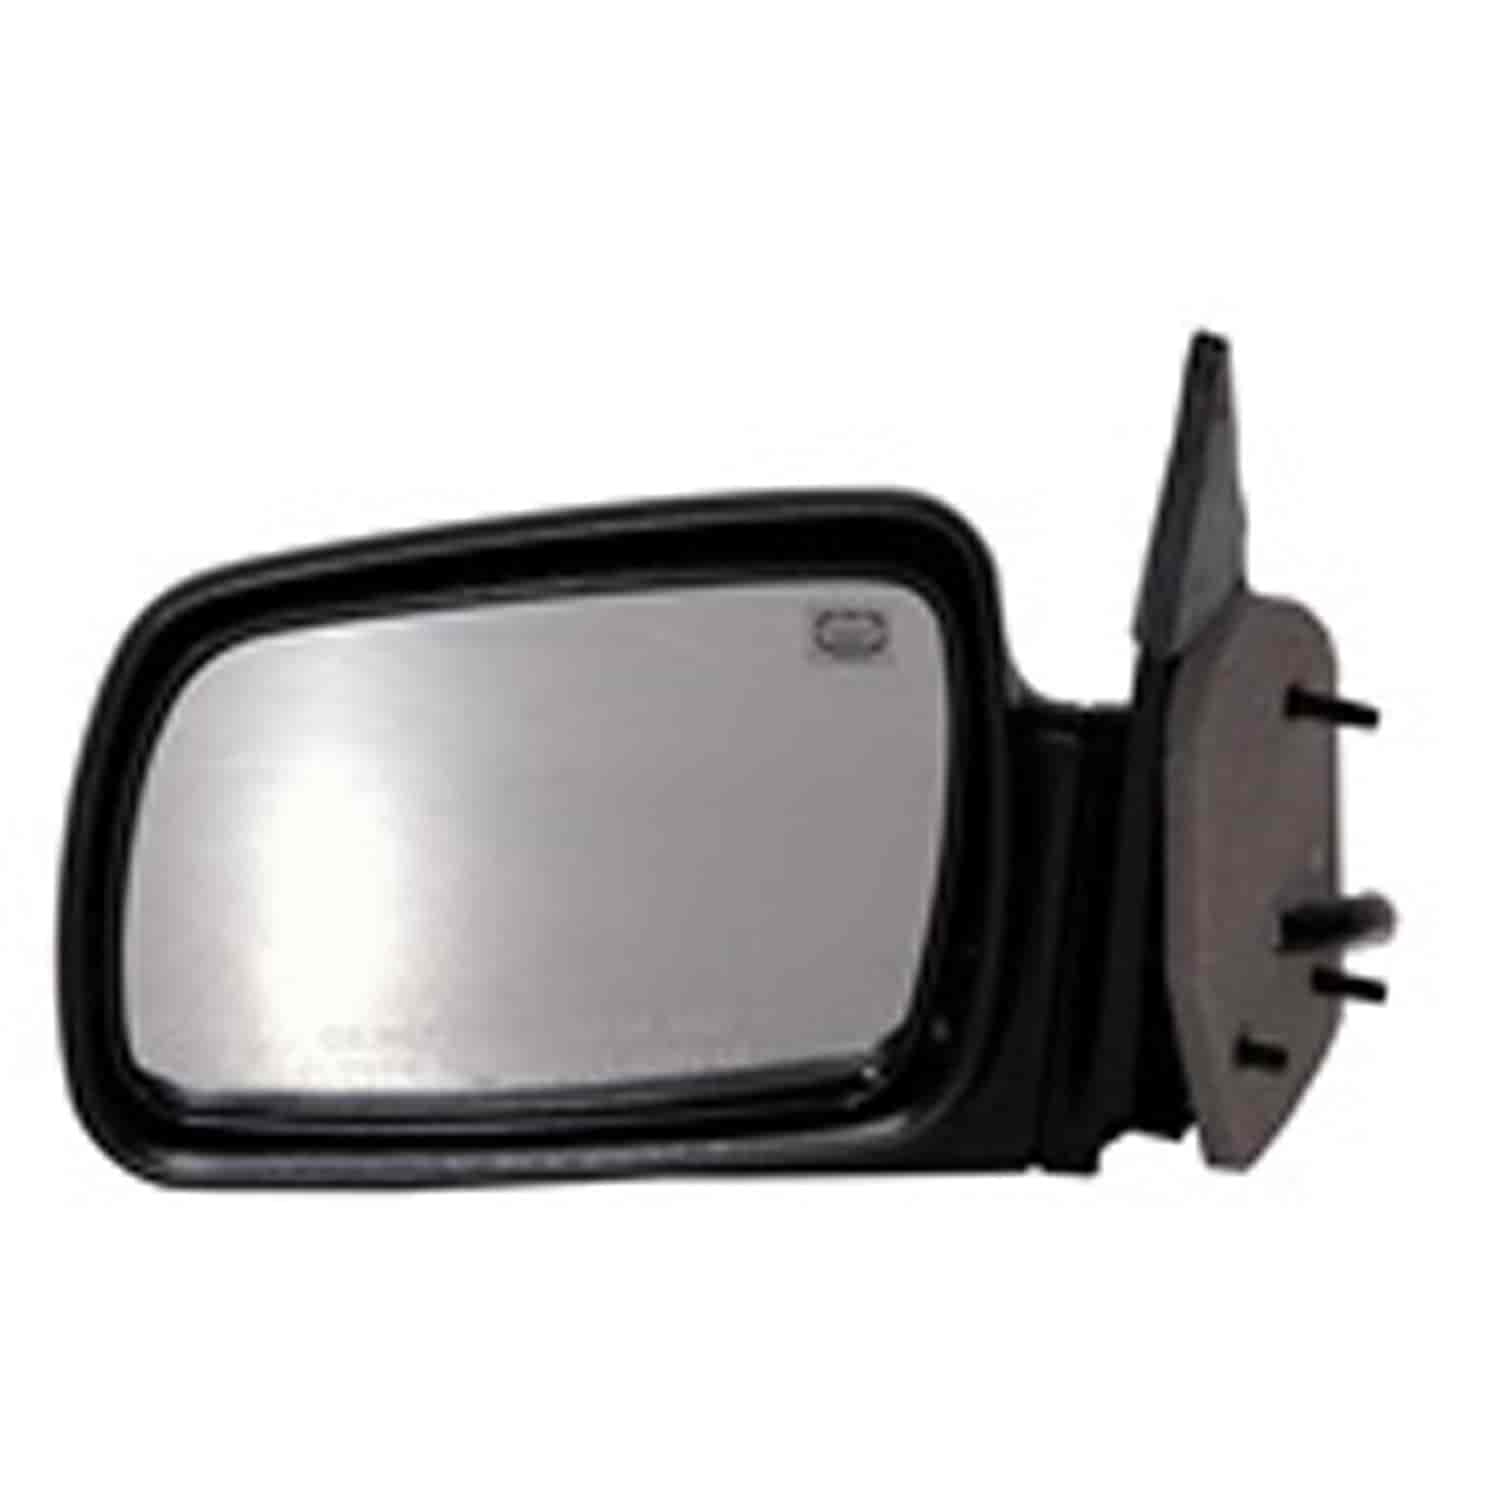 This black folding power door mirror from Omix-ADA is heated and fits the right door on 99-04 Jeep Grand Cherokee WJ.